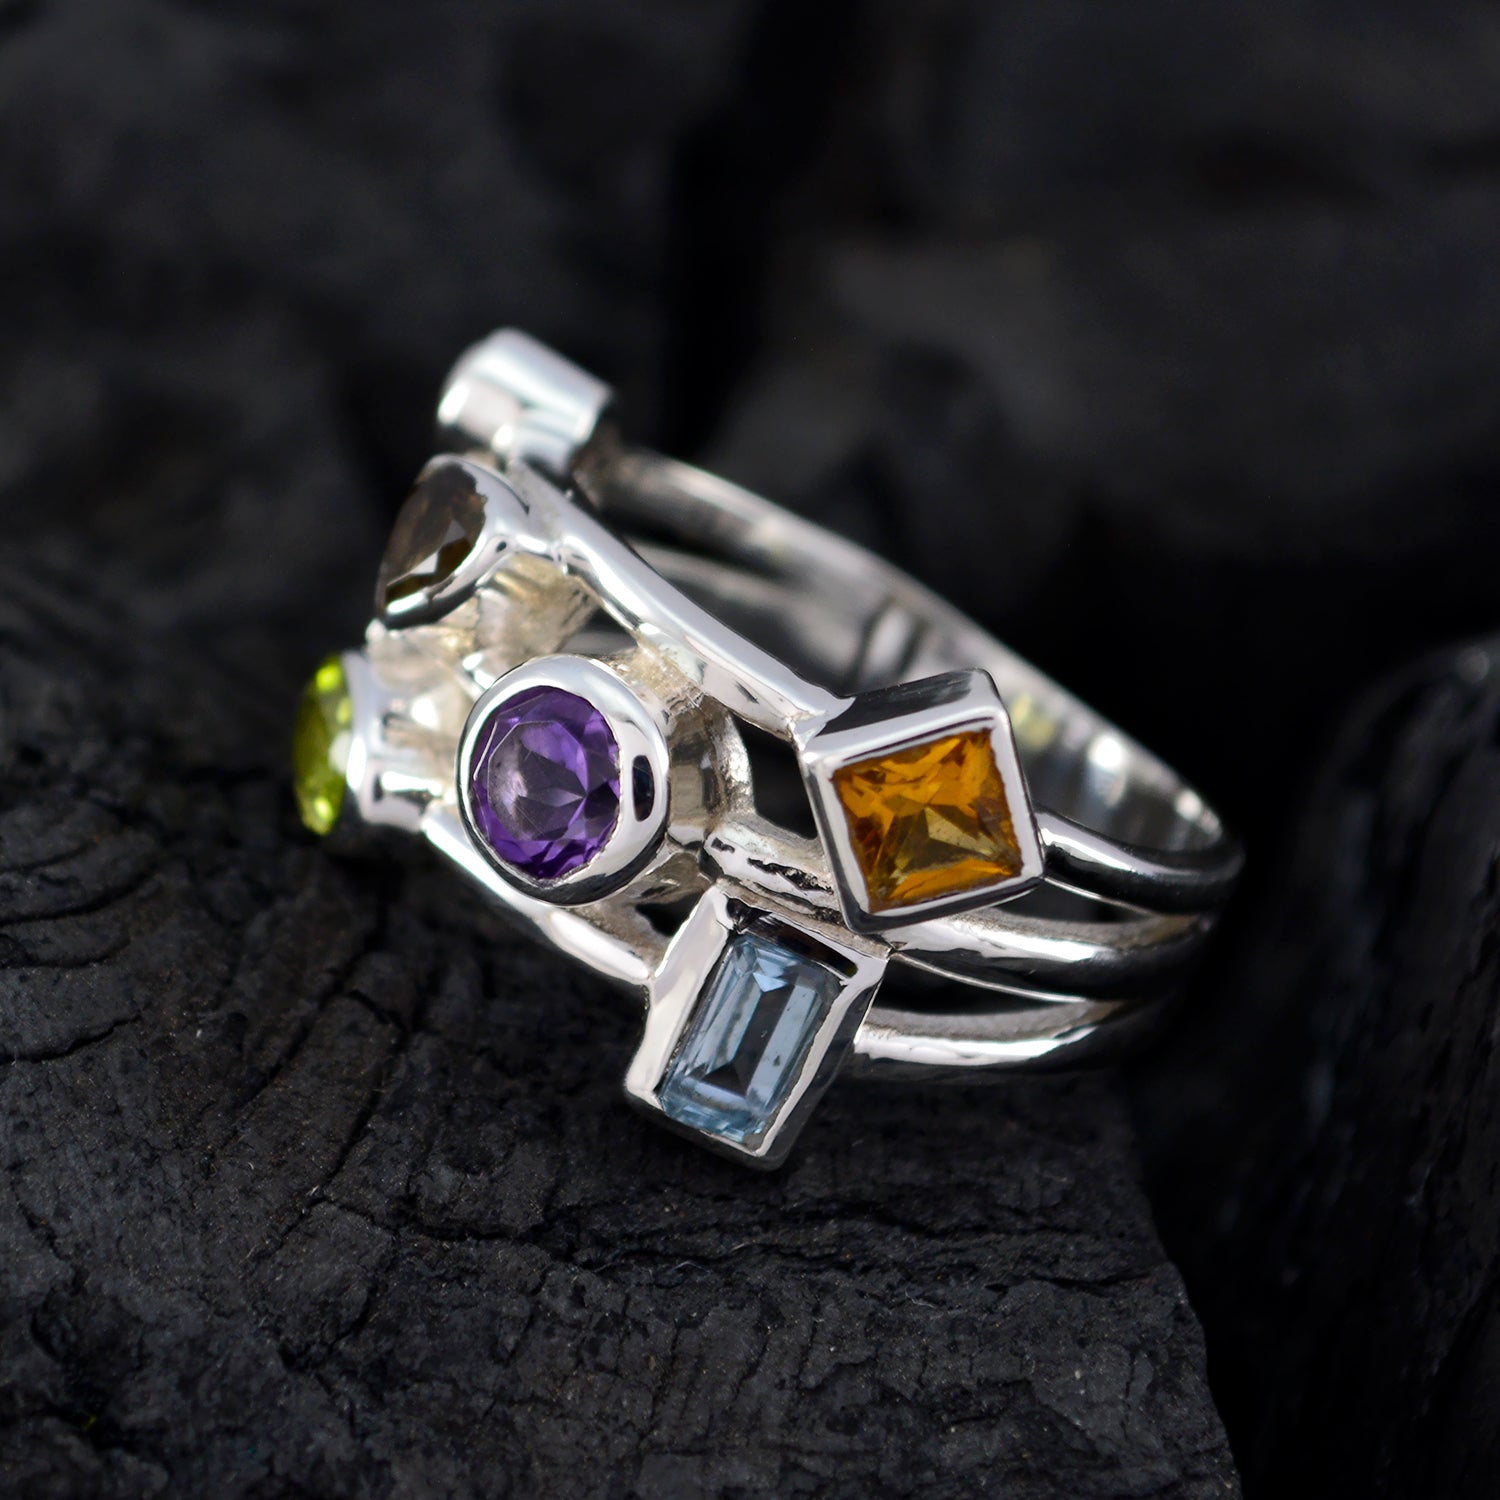 Well-Formed Gemstones Multi Stone Sterling Silver Ring Arm Jewelry